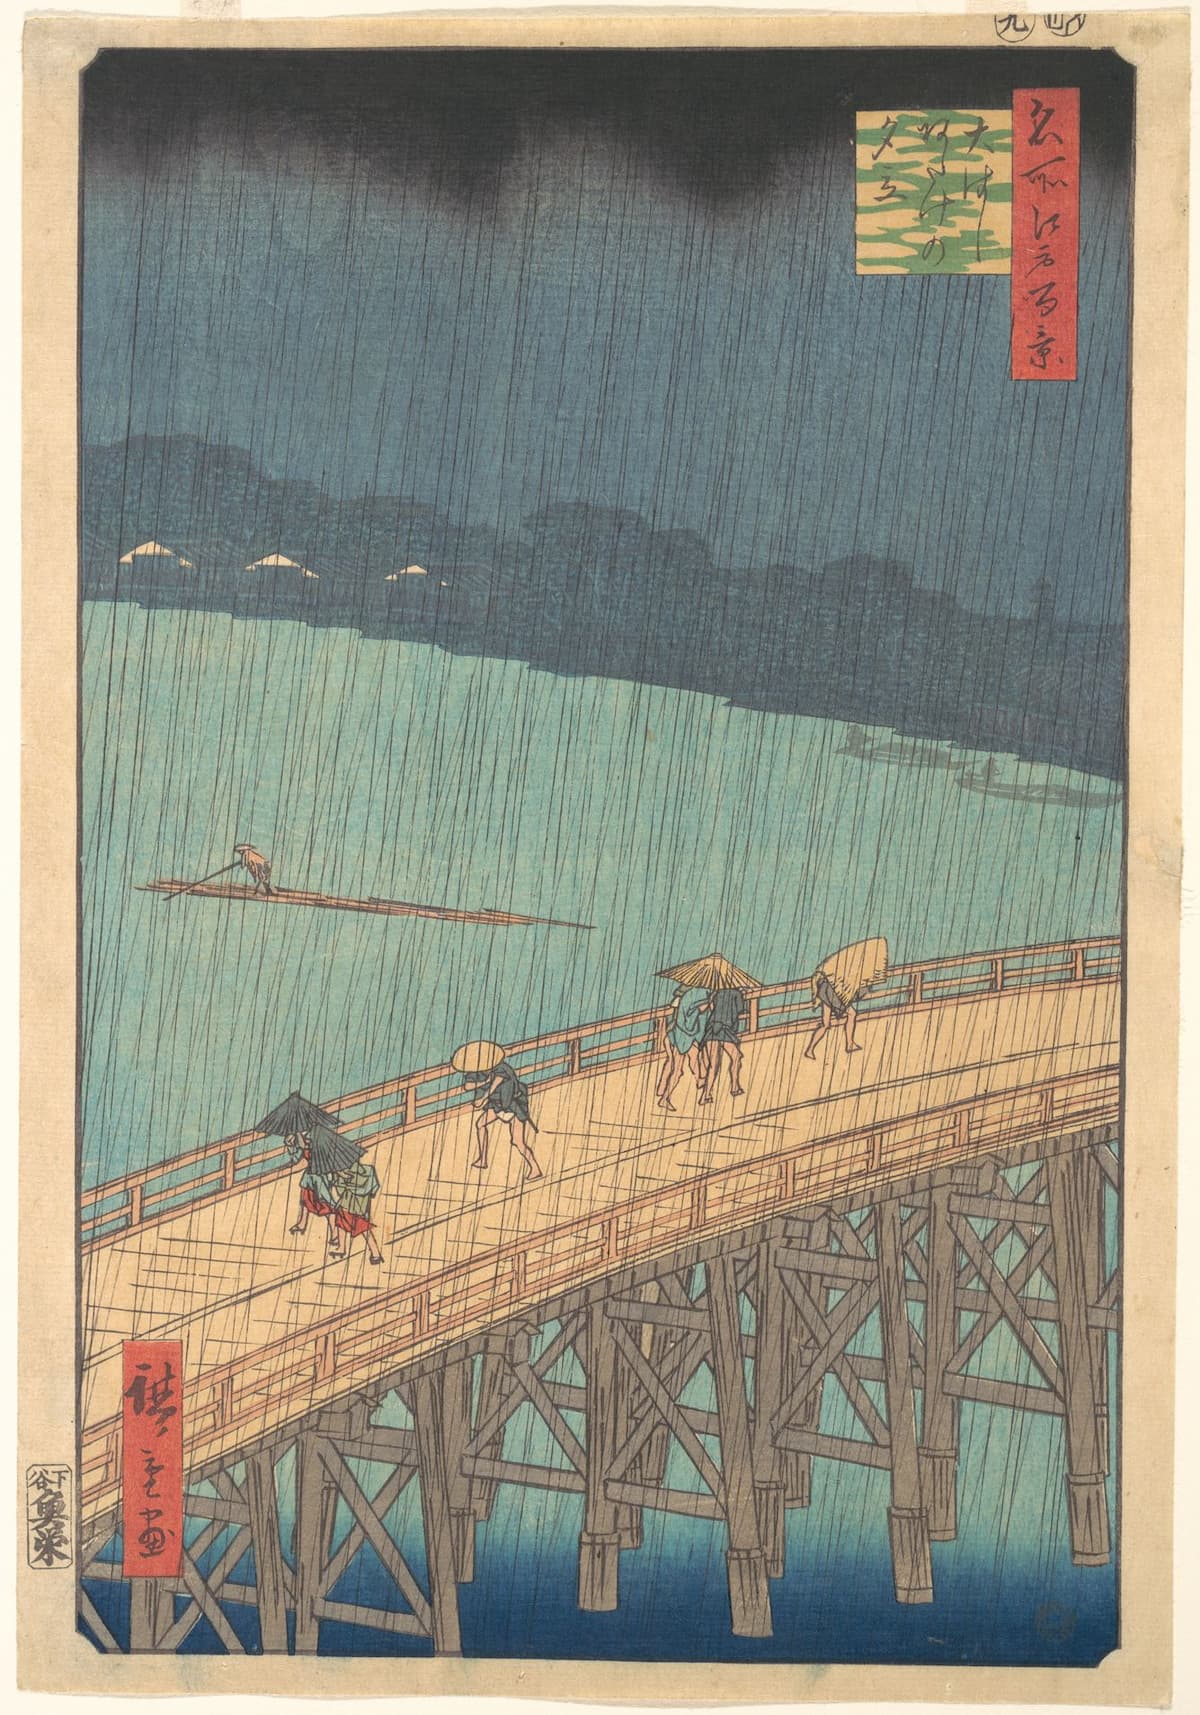 Musicians and Artists: Poole and Hiroshige